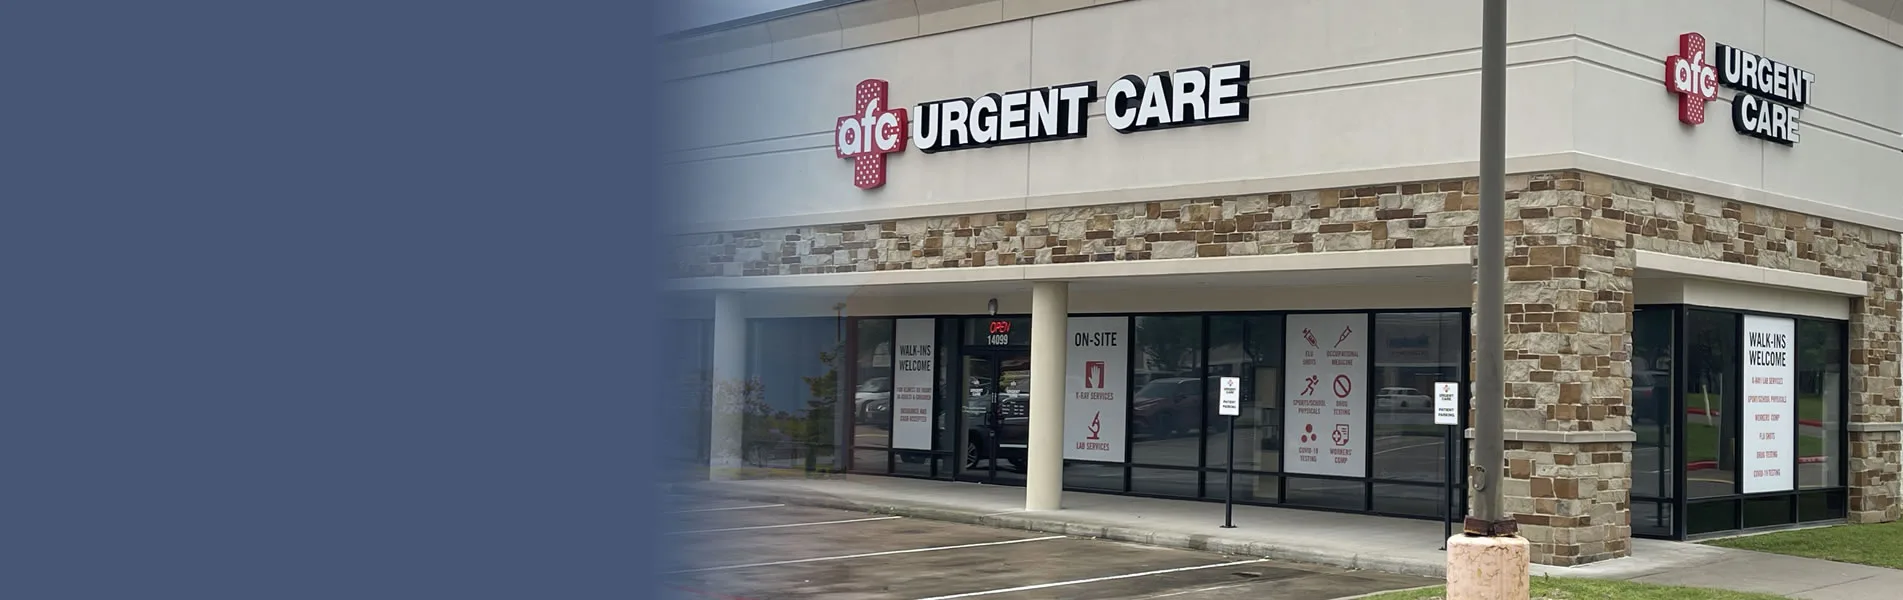 Visit our urgent care center in Tomball, TX